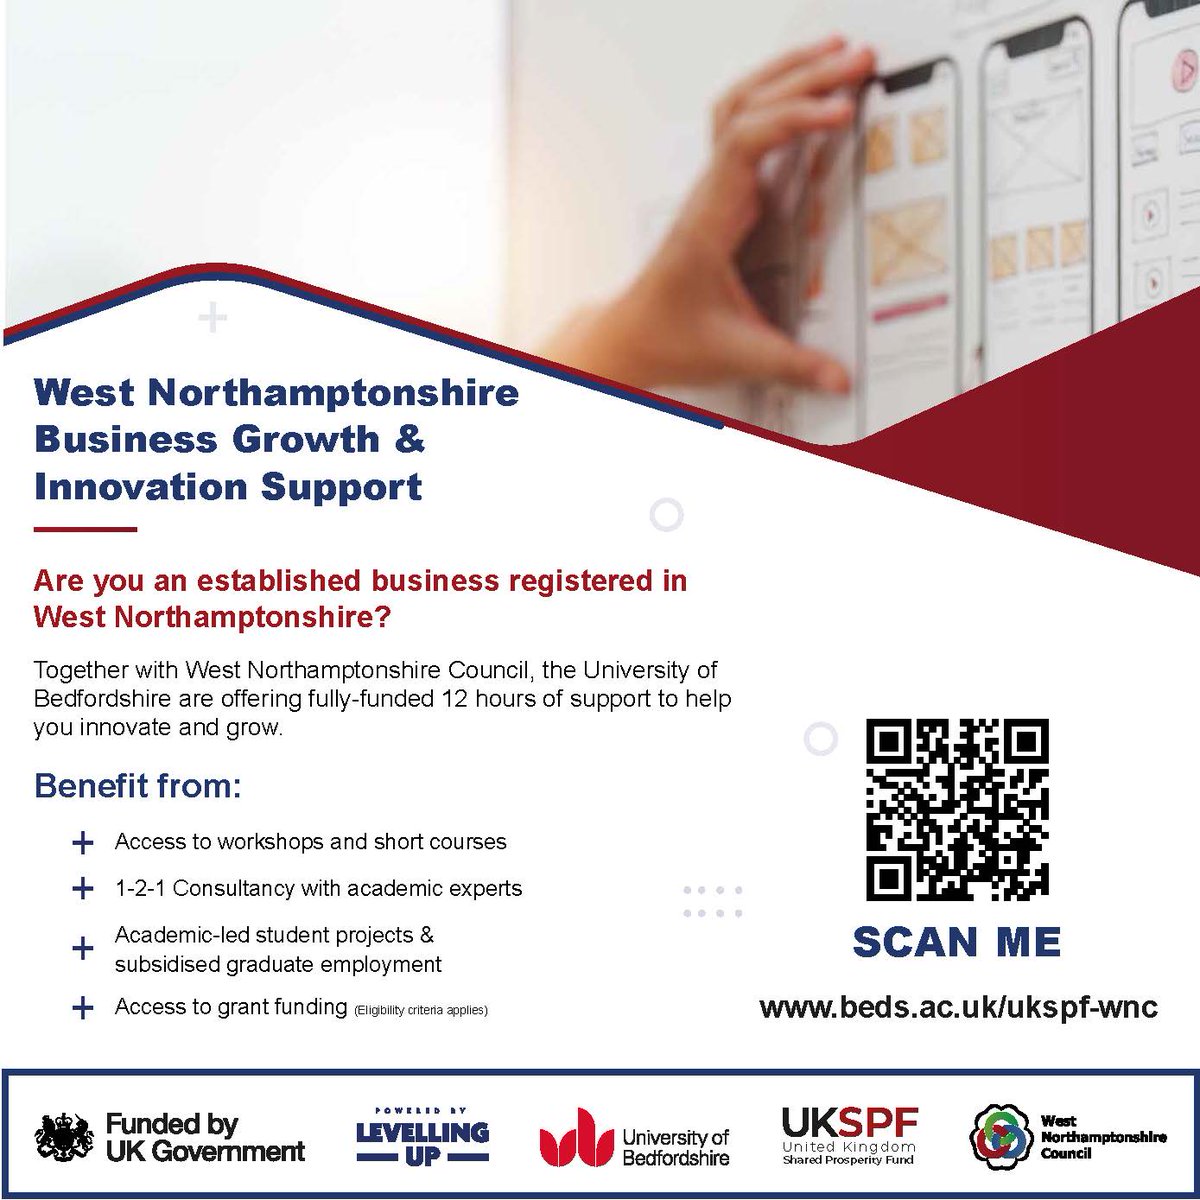 Is your team ready for success? Funded by #UKSPF, @uniofbeds in partnership with @WestNorthants offers a range of free workshops & business support initiatives designed to foster #growth & increase productivity within your business. 🌐 beds.ac.uk/ukspf-wnc